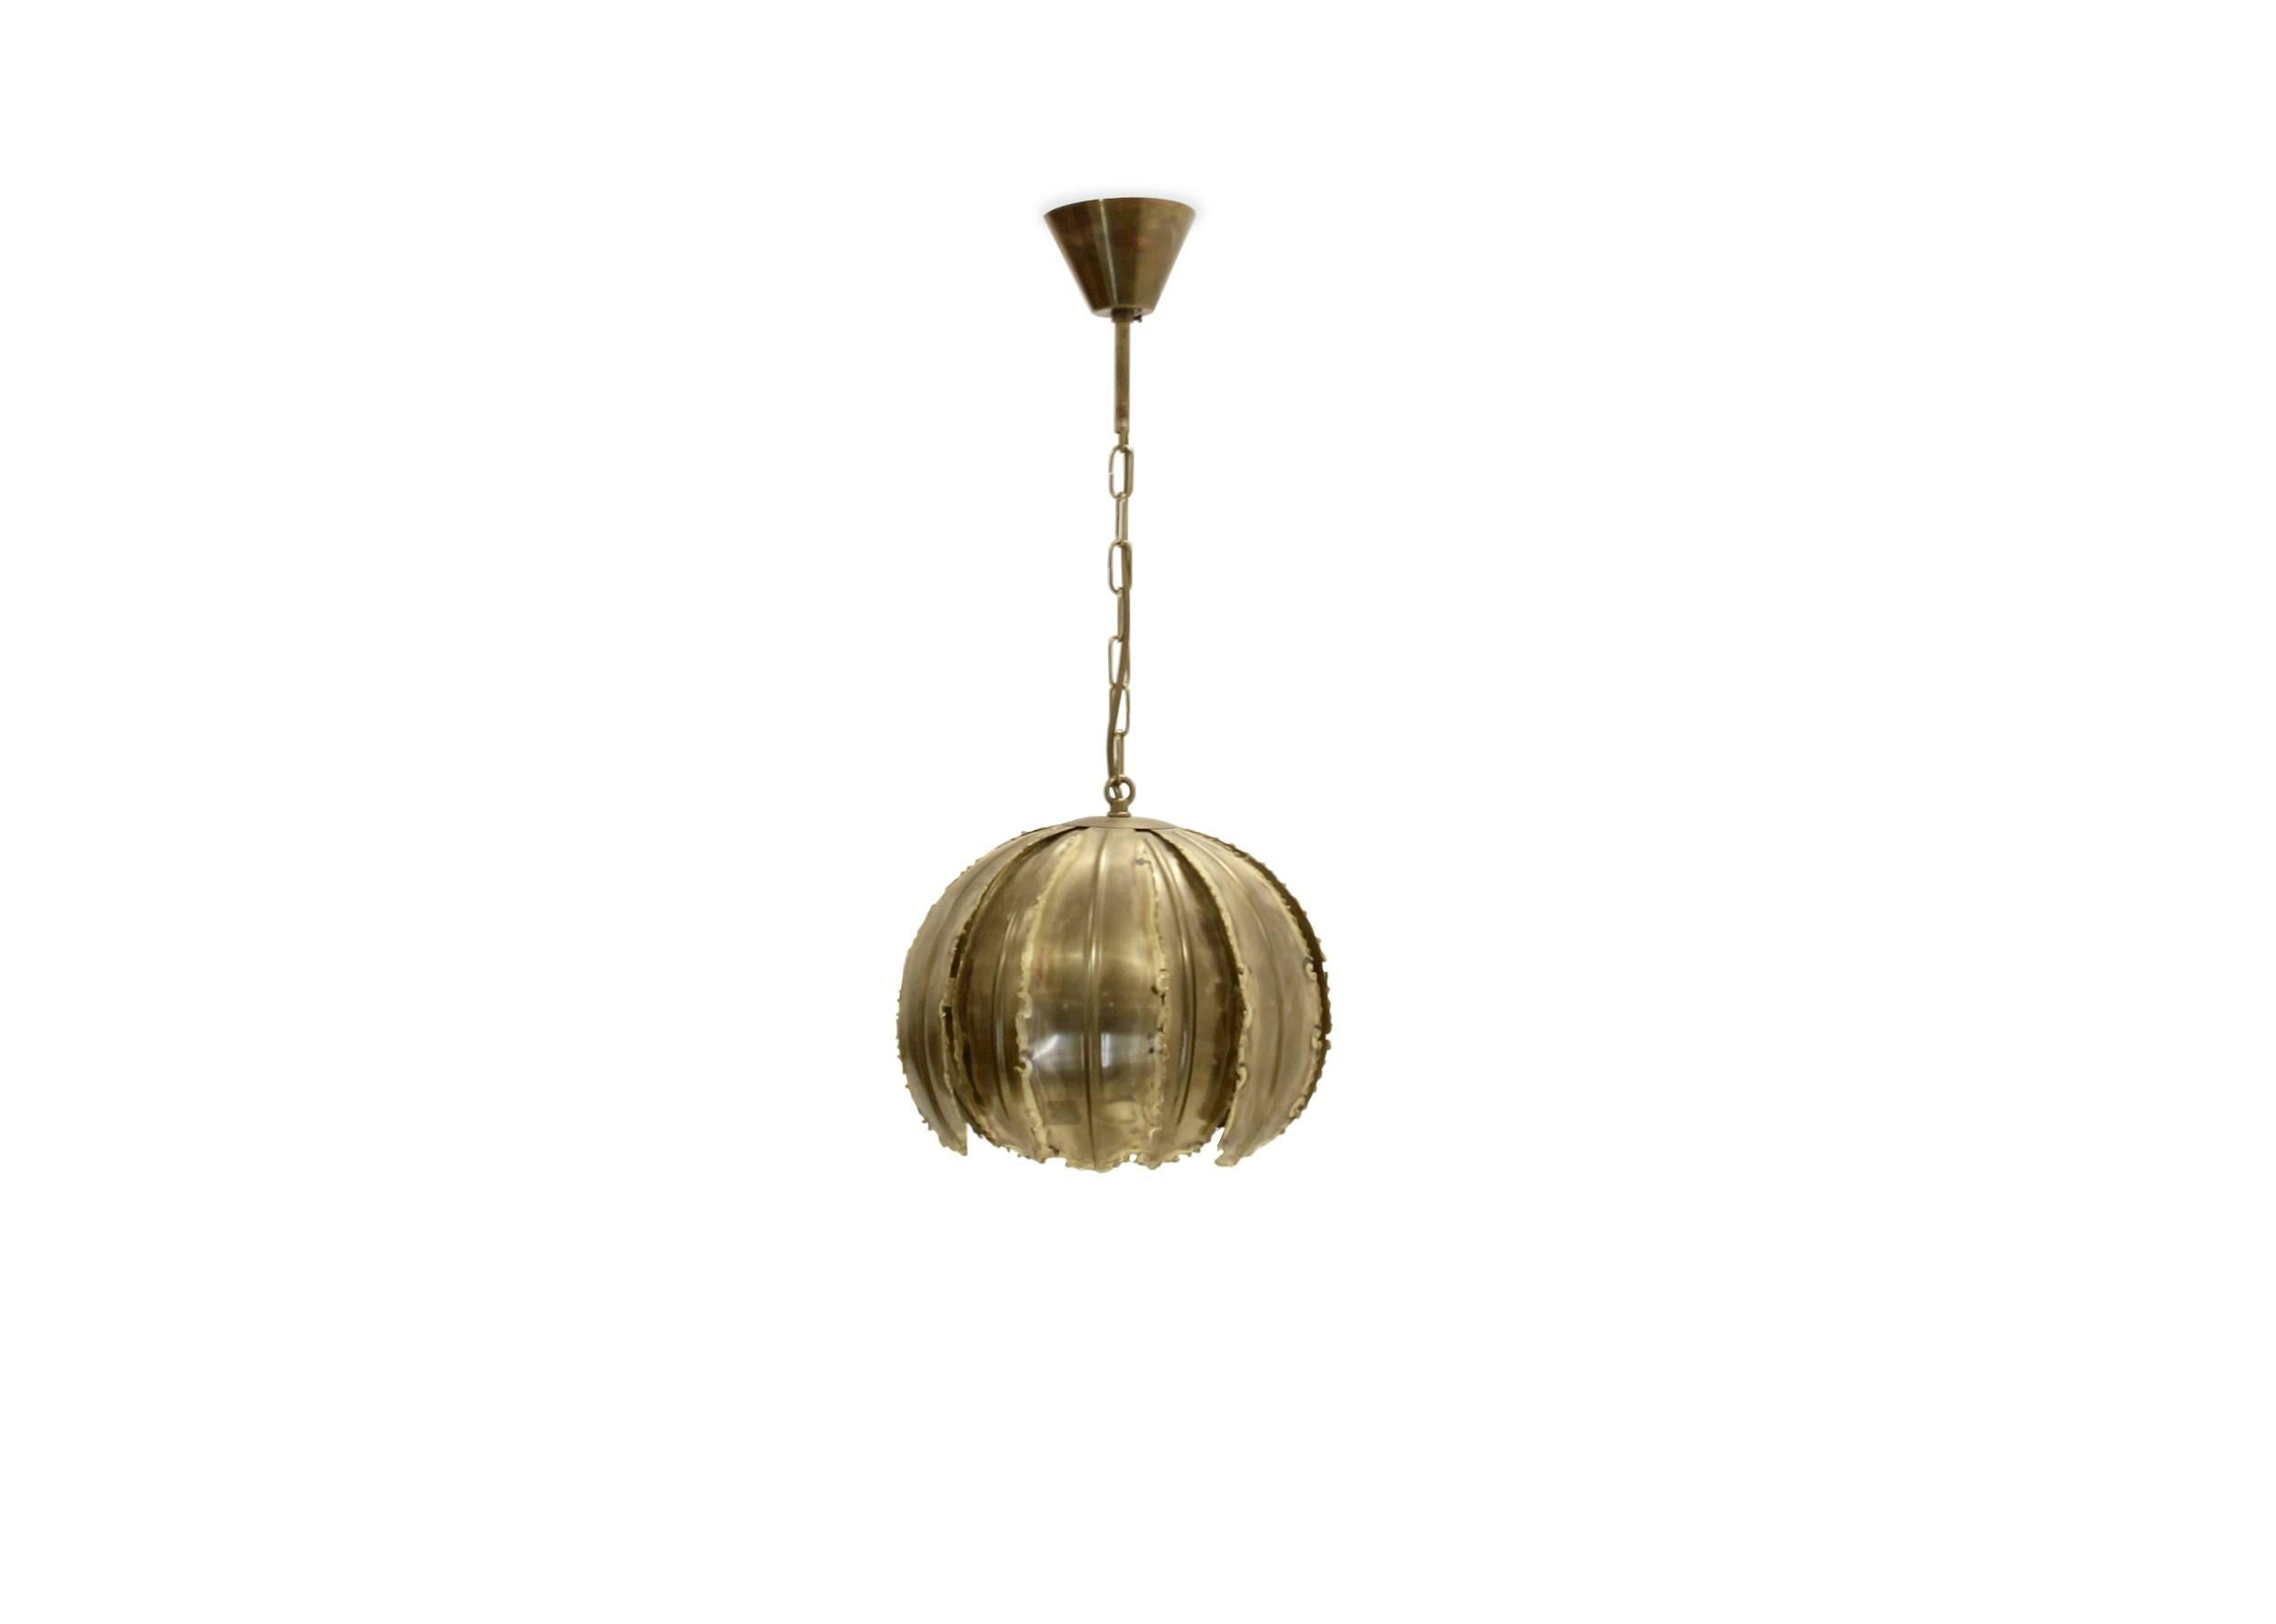 Well made ceiling pendant in patinated brass.

This is model 'Poppy'. Designed by Svend Aage Holm and made in Denmark by Holm Sorensen from circa 1970s second half. 

The pendant is fully working and in excellent vintage condition.

Height